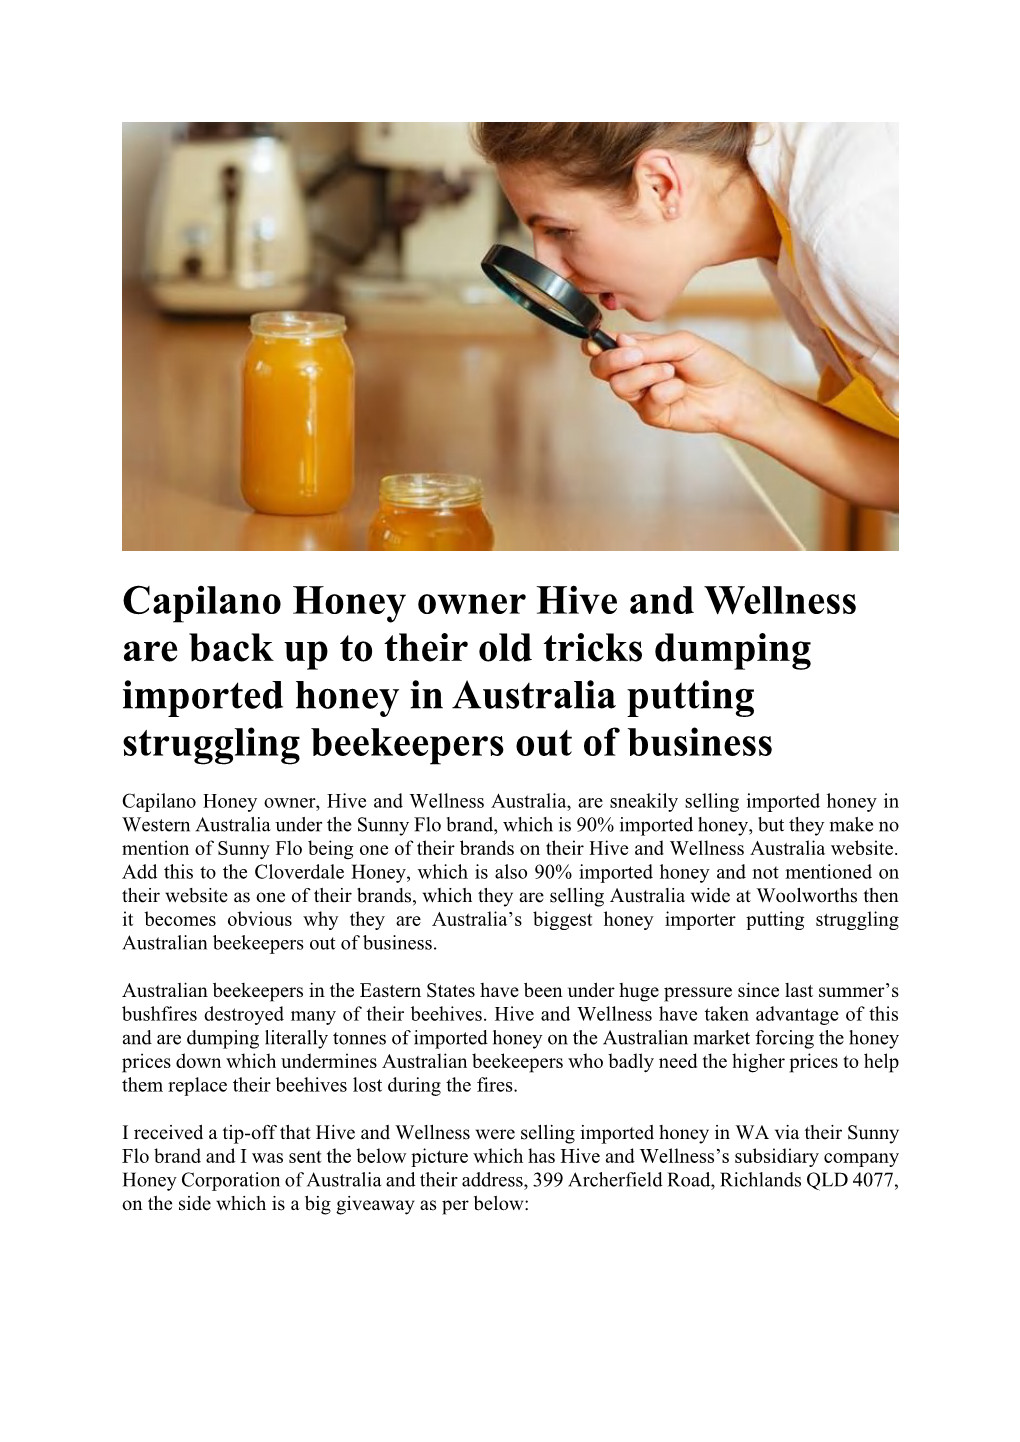 Capilano Honey Owner Hive and Wellness Are Back up to Their Old Tricks Dumping Imported Honey in Australia Putting Struggling Beekeepers out of Business